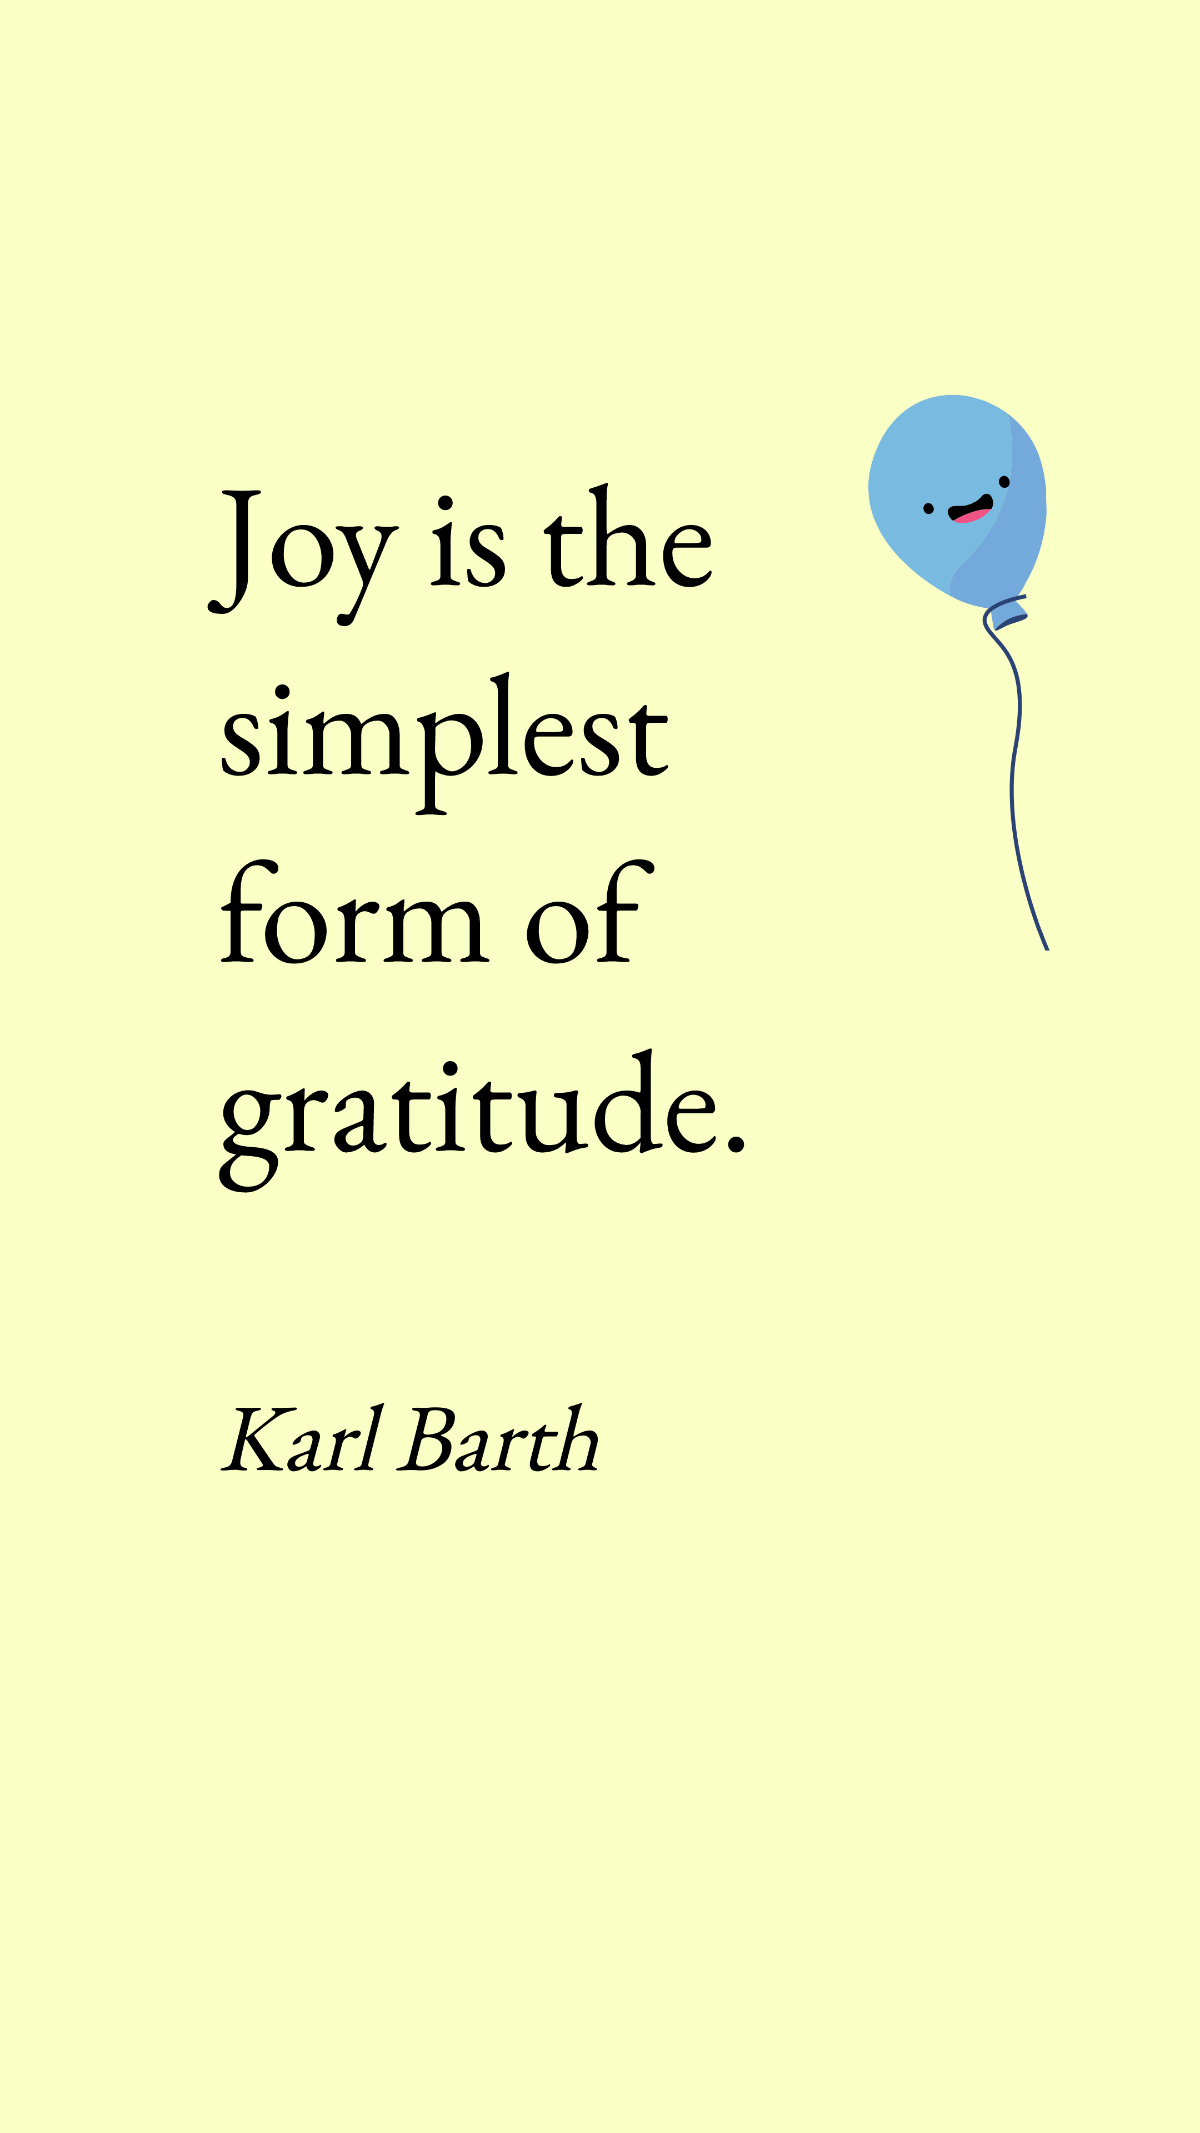 Karl Barth - Joy is the simplest form of gratitude. 